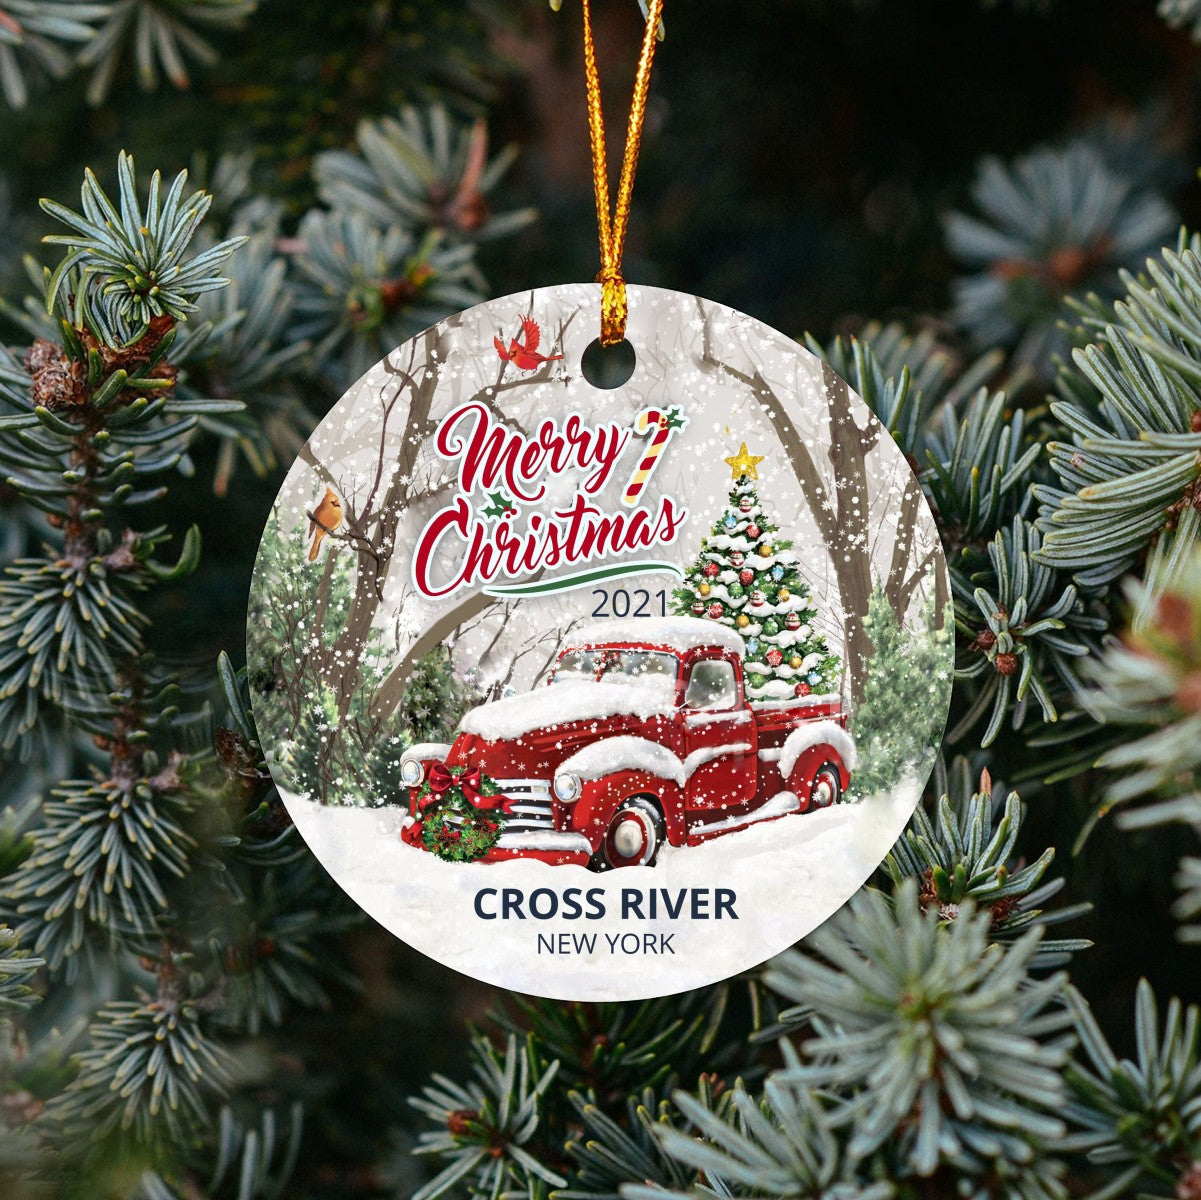 Christmas Tree Ornaments Cross River - Ornament With Name City, State Cross River New York NY Ornament - Red Truck Xmas Ornaments 3'' Plastic Gift For Family, Friend And Housewarming